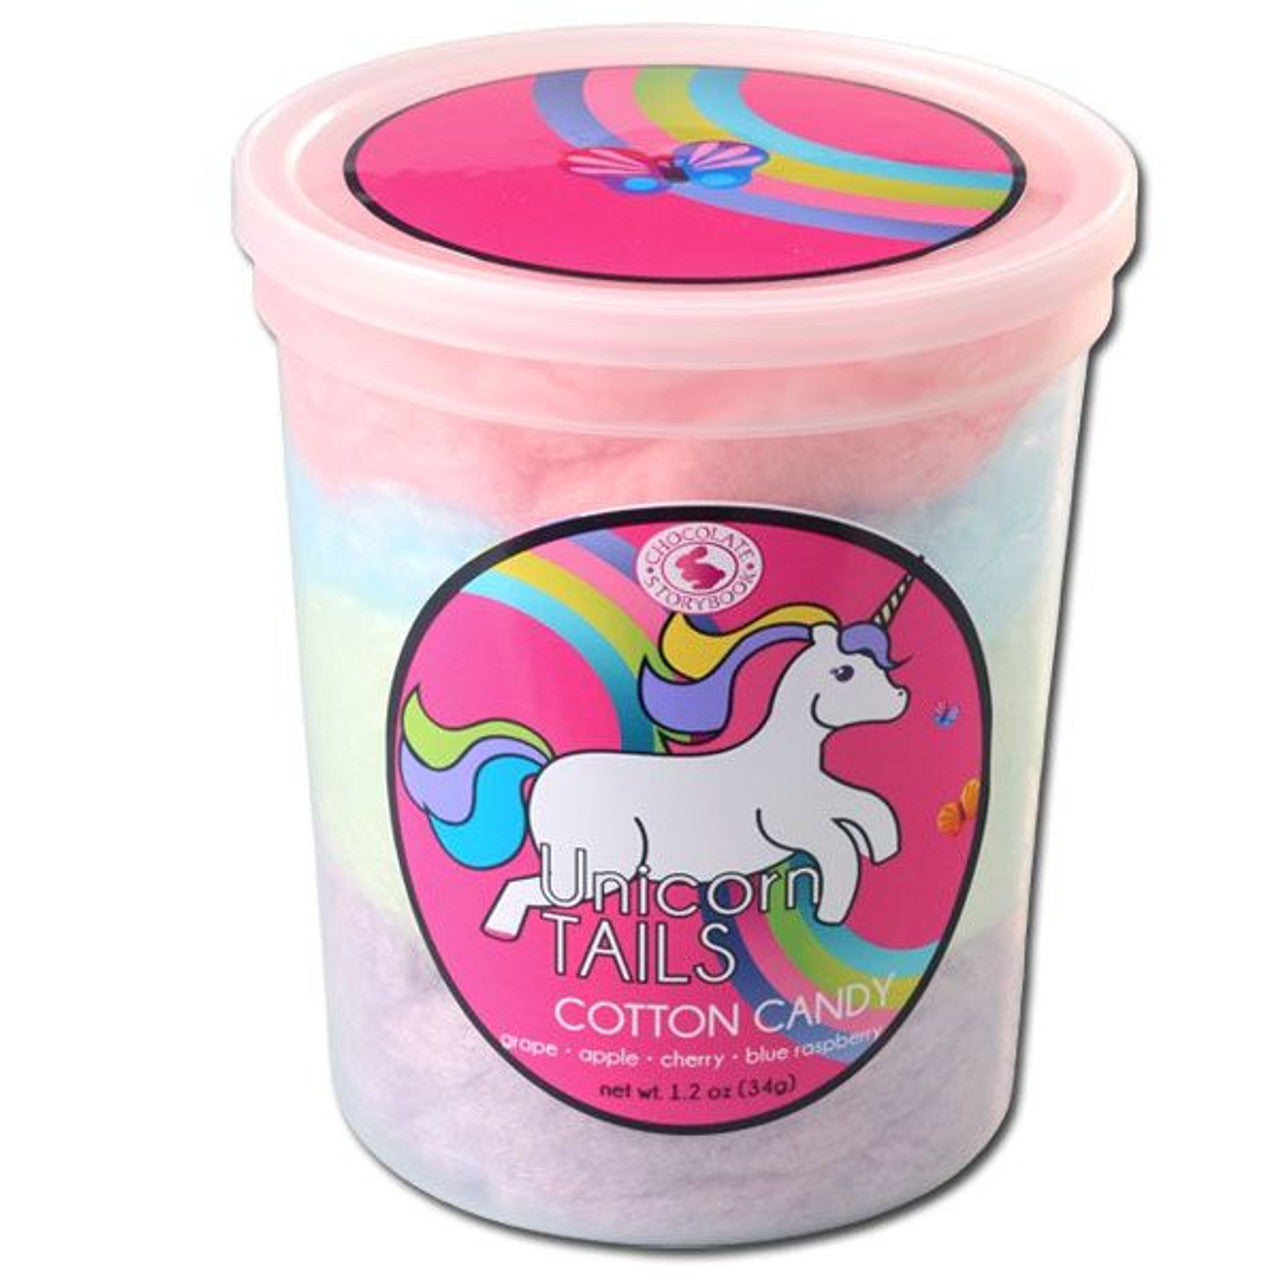 Unicorn Tails Assorted Flavors Cotton Candy